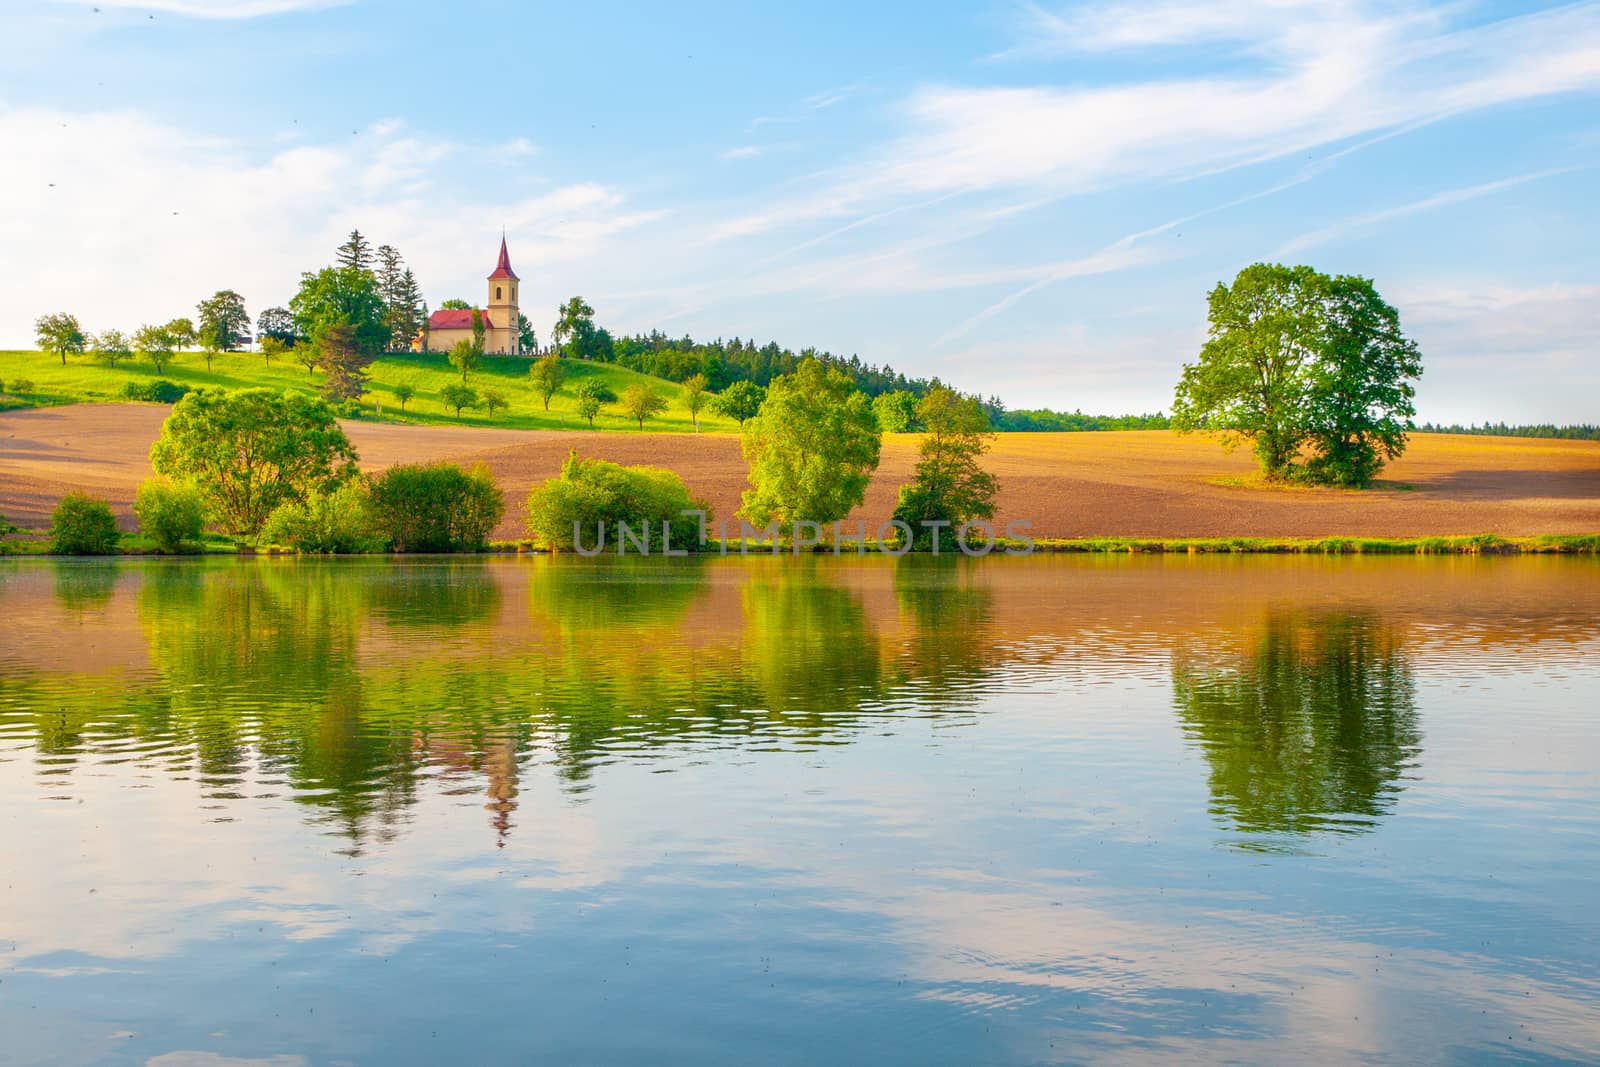 Romantic landscape with small church on the hill reflected in the pond. Sunny summer day with blue sky and white clouds. St. Peter and Pauls church at Bysicky near Lazne Belohrad, Czech Republic.